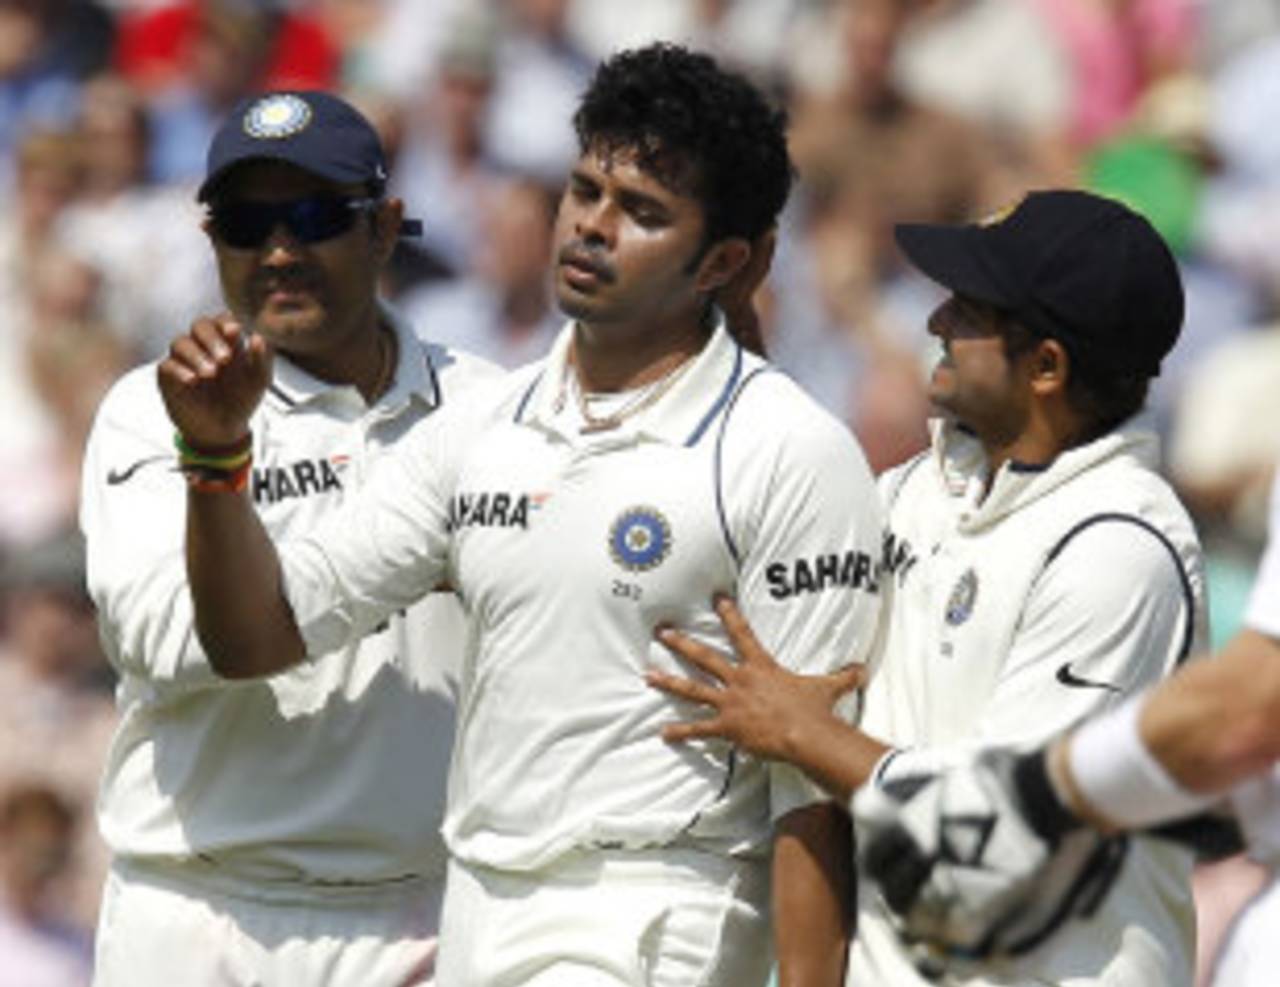 Sreesanth is making the most of being back in action after a year sidelined&nbsp;&nbsp;&bull;&nbsp;&nbsp;Getty Images